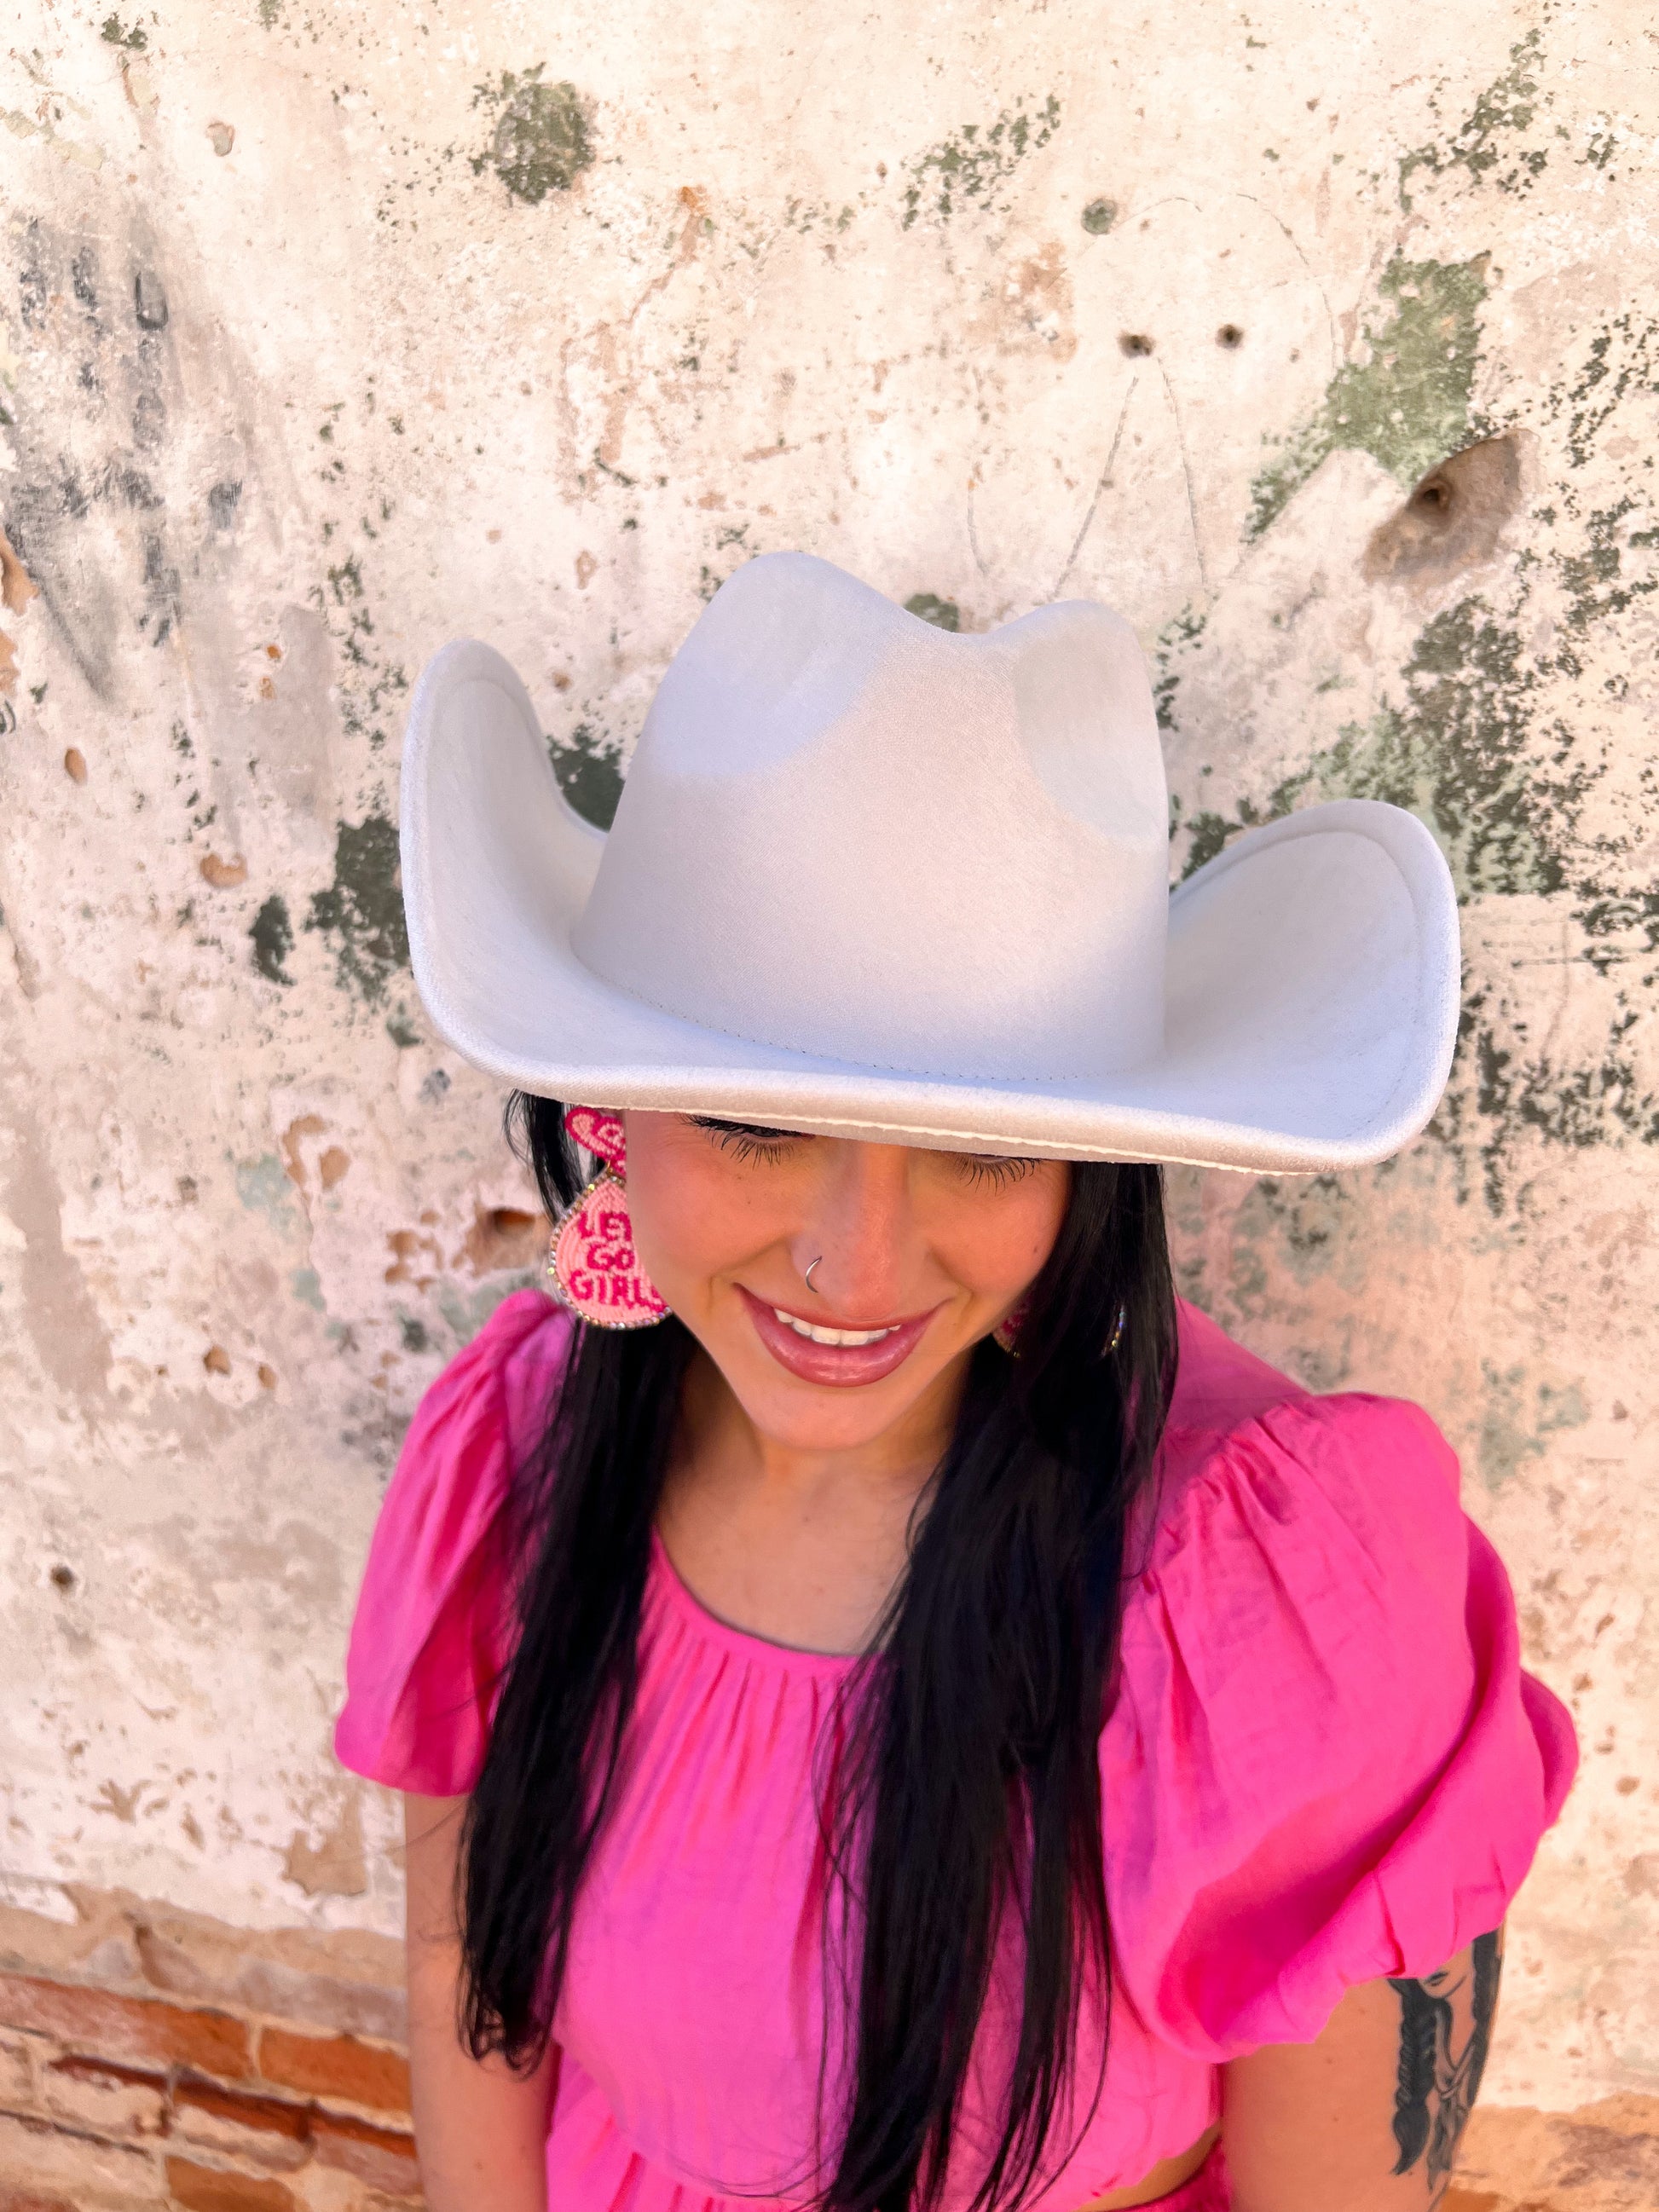 Silver Rhinestone Star Cowboy Hat - Ivory-Cowboy Hat-Fame Accessories-MMT8929-The Twisted Chandelier